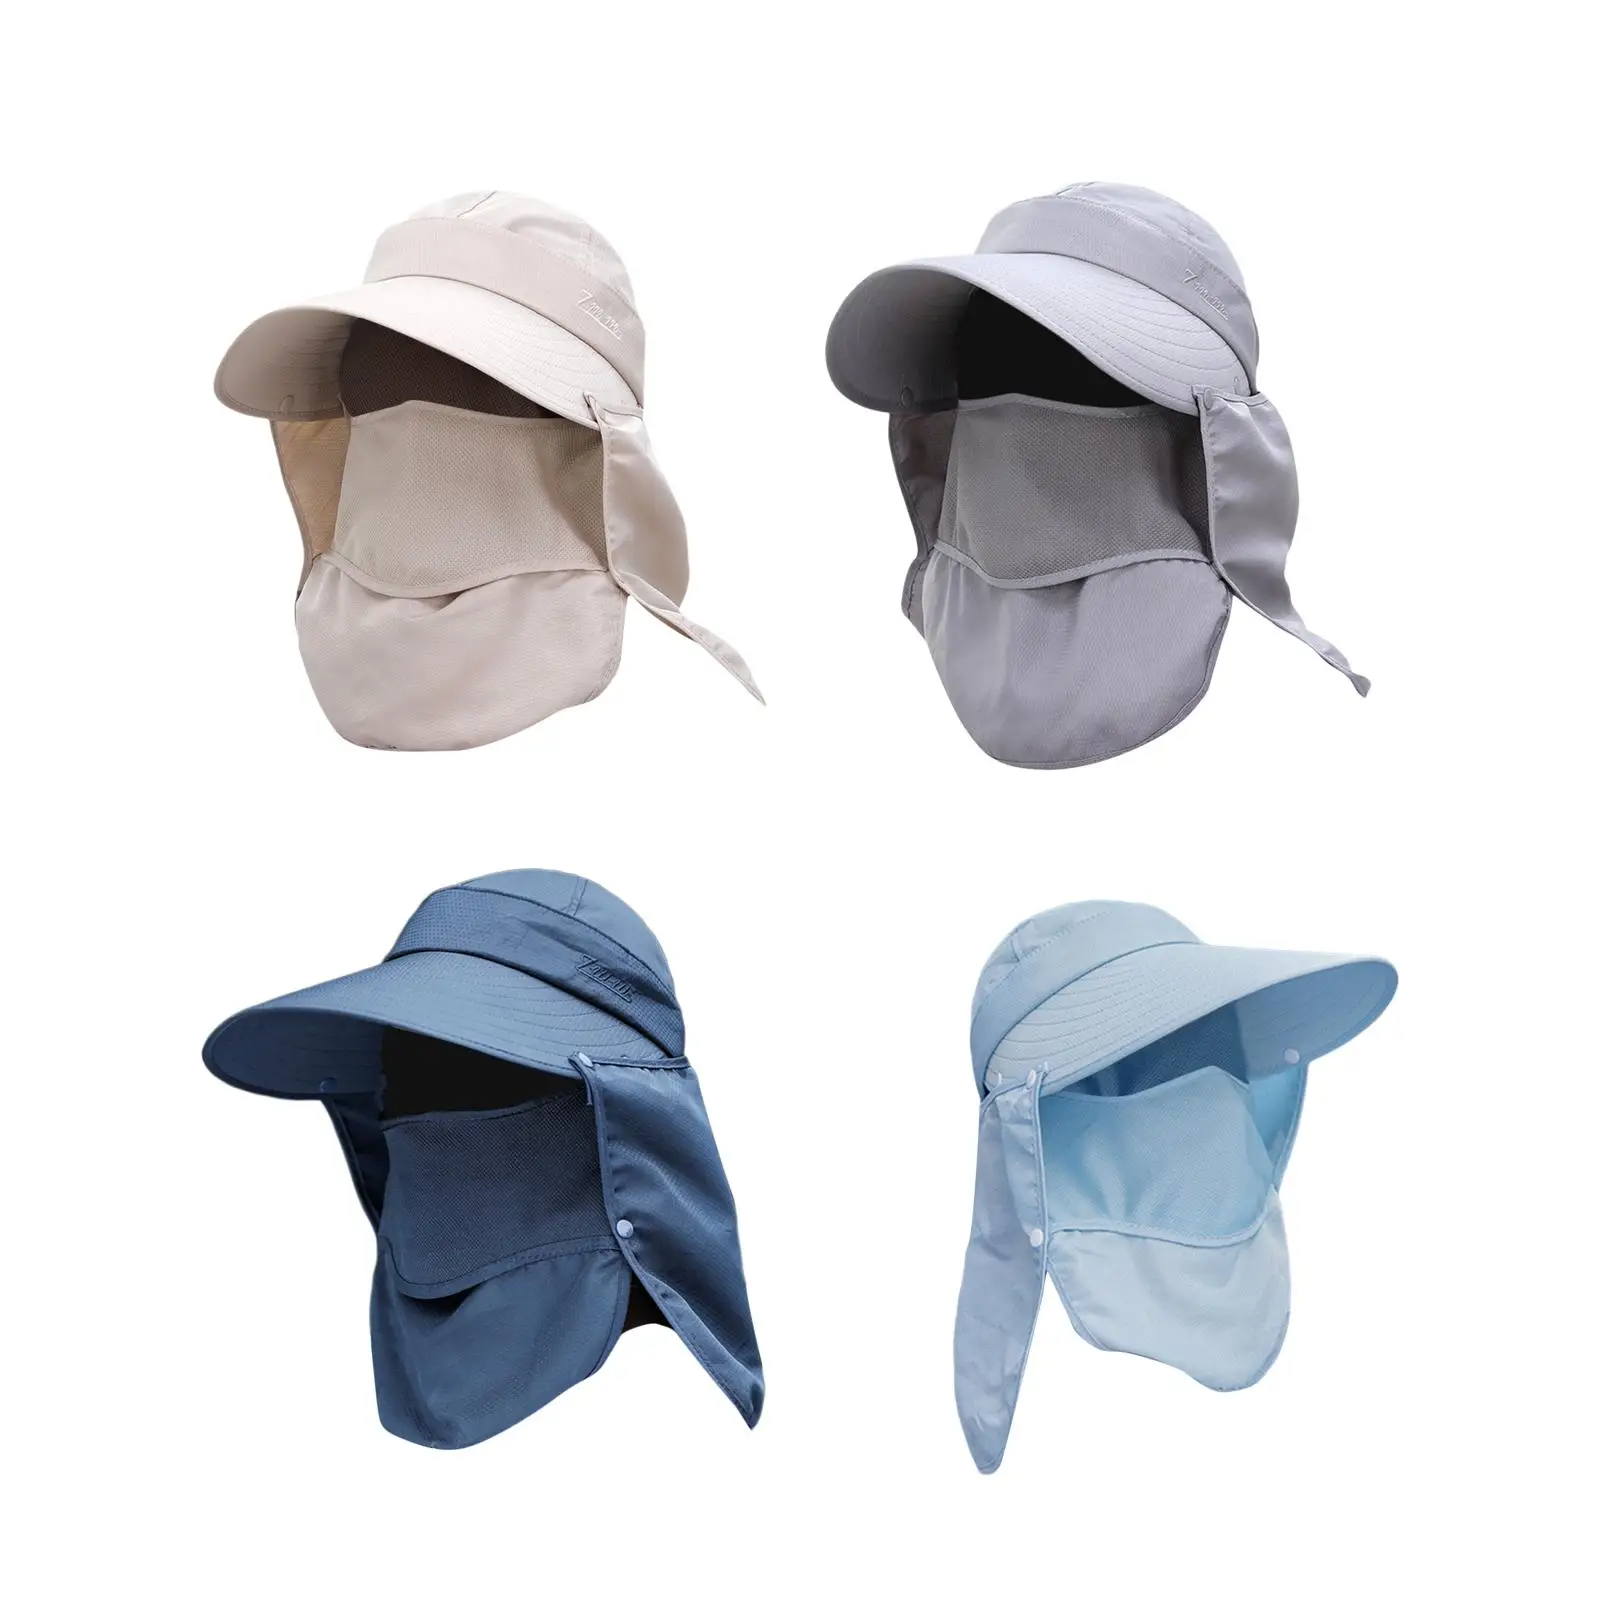 

Neck Gaiter Face Cover with Detachable Neck Flap Cover Visor Wide Brim Breathable Sun Hap for Travel Outdoor Gardening Summer